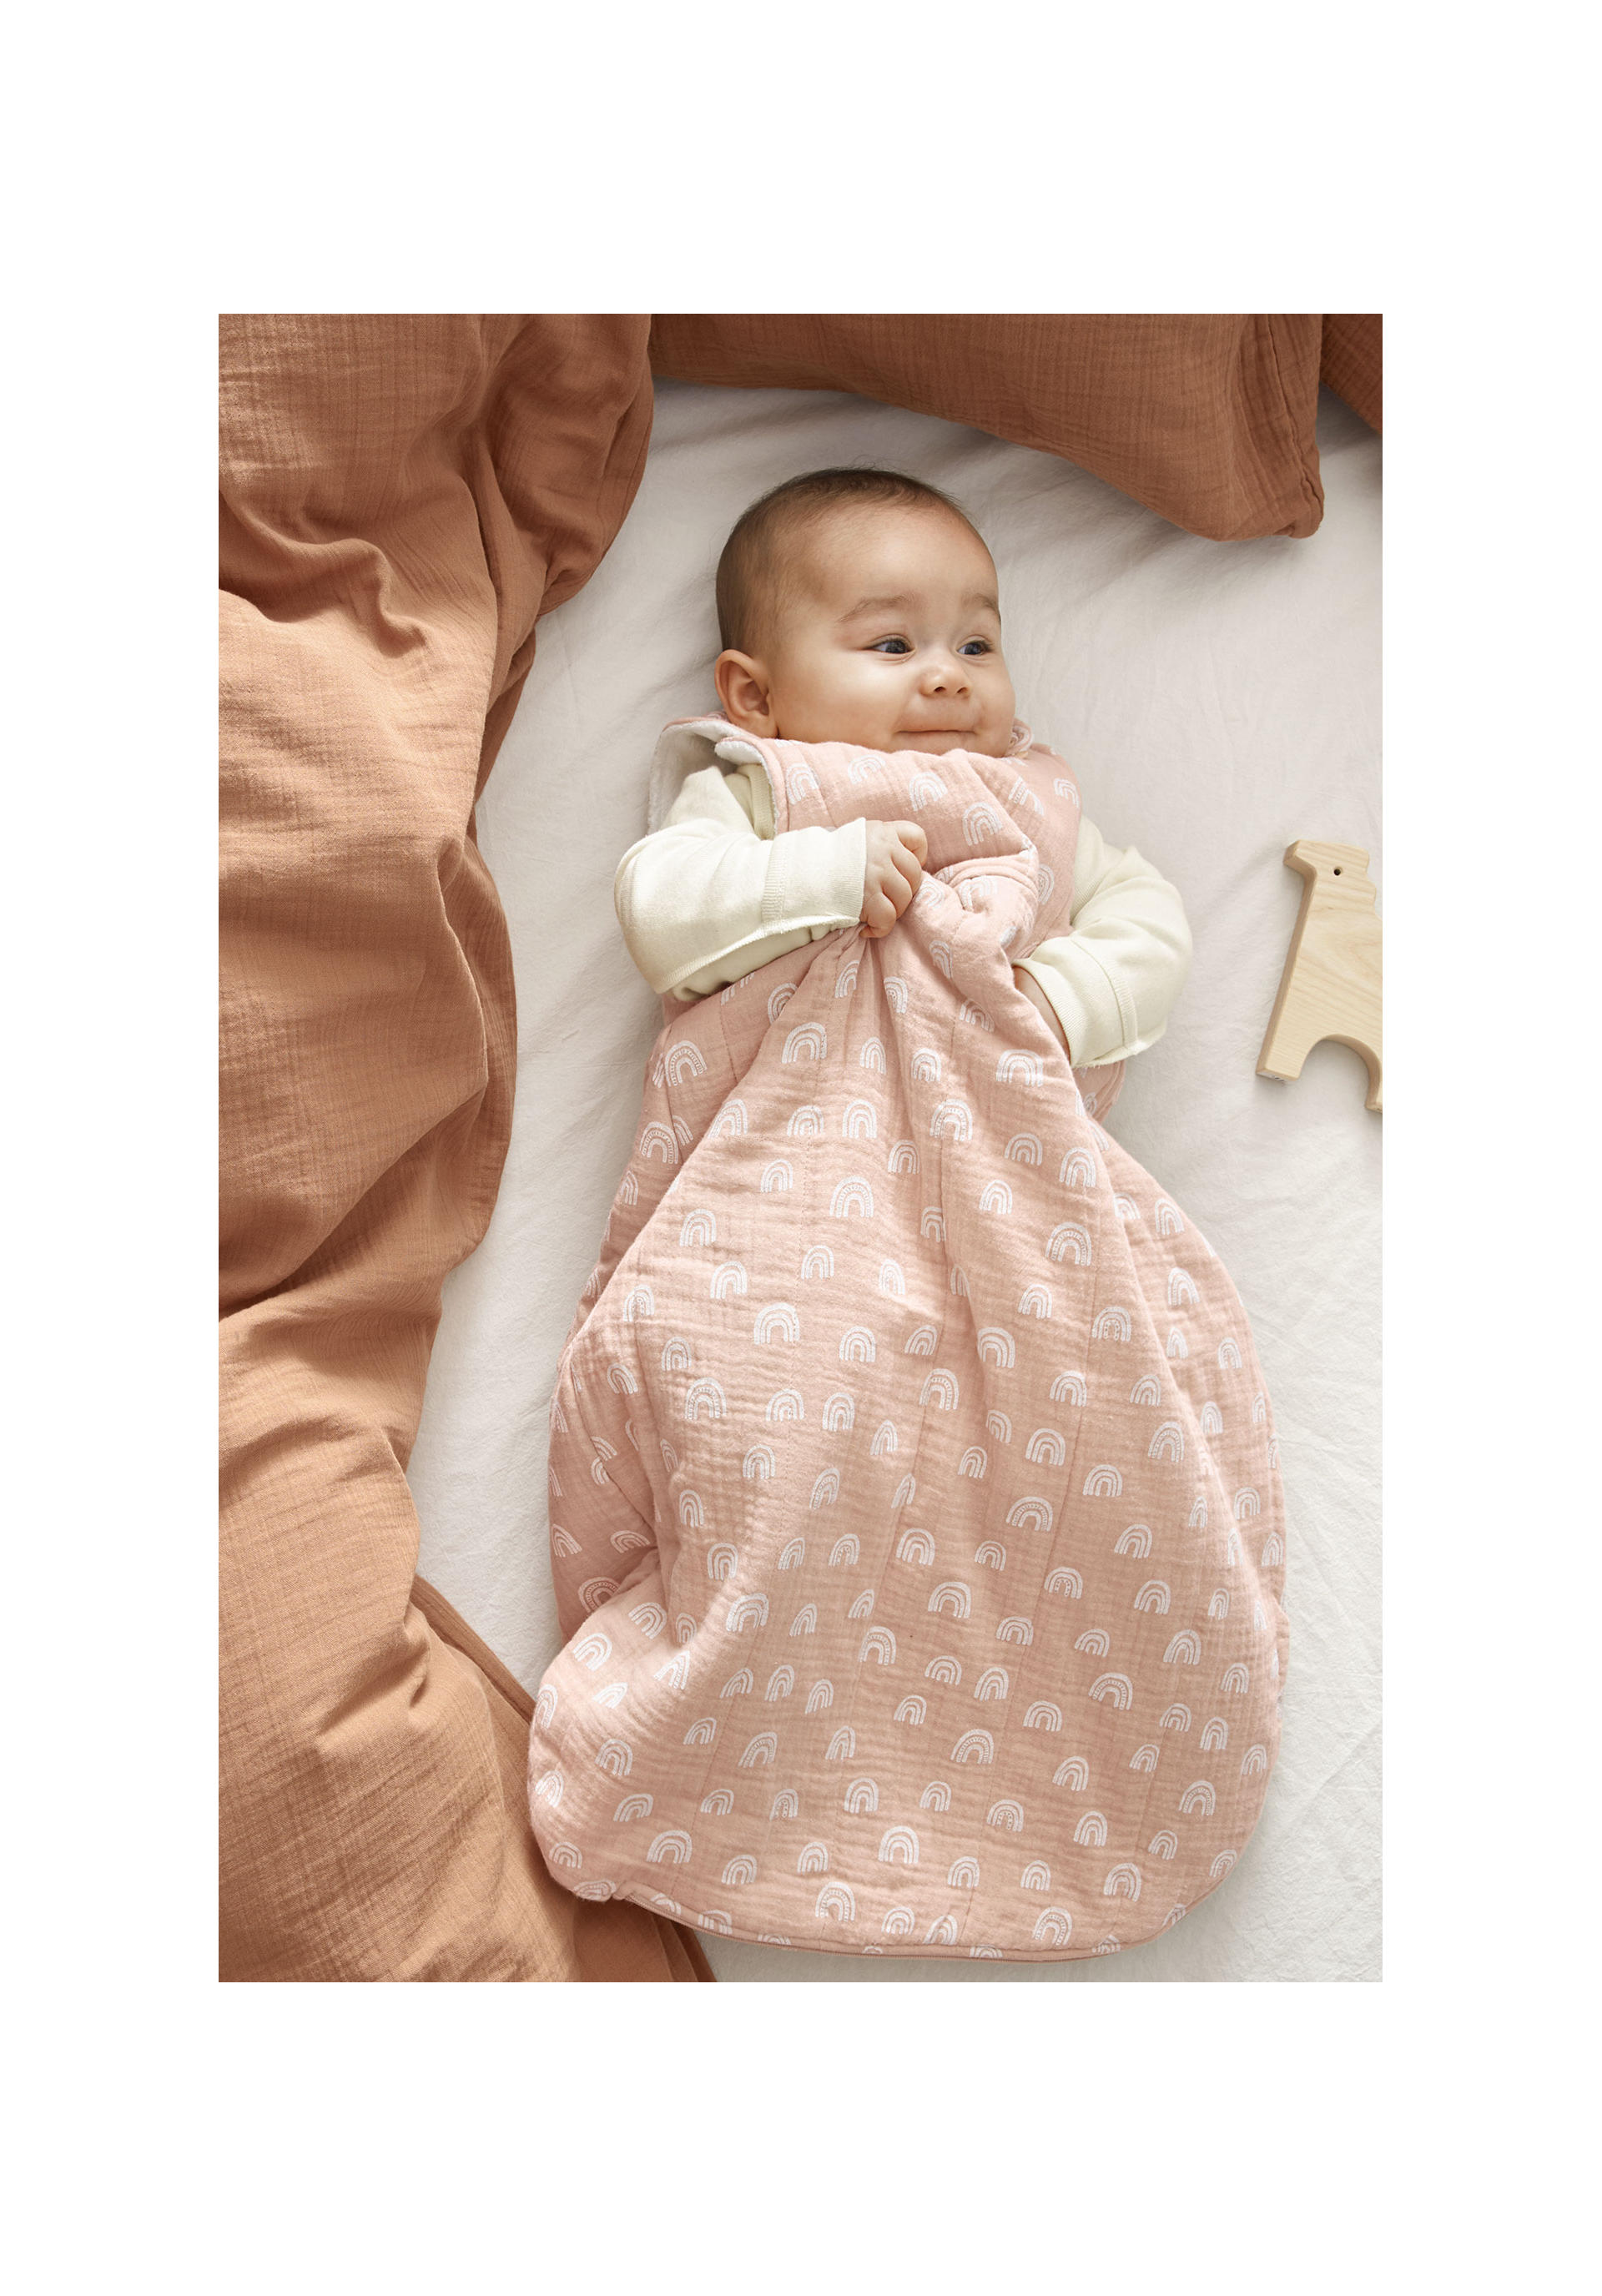 100% Natural Pure Merino Wool ~ Quilted Cover Baby Snuggler Sleeping Bag Warmer 